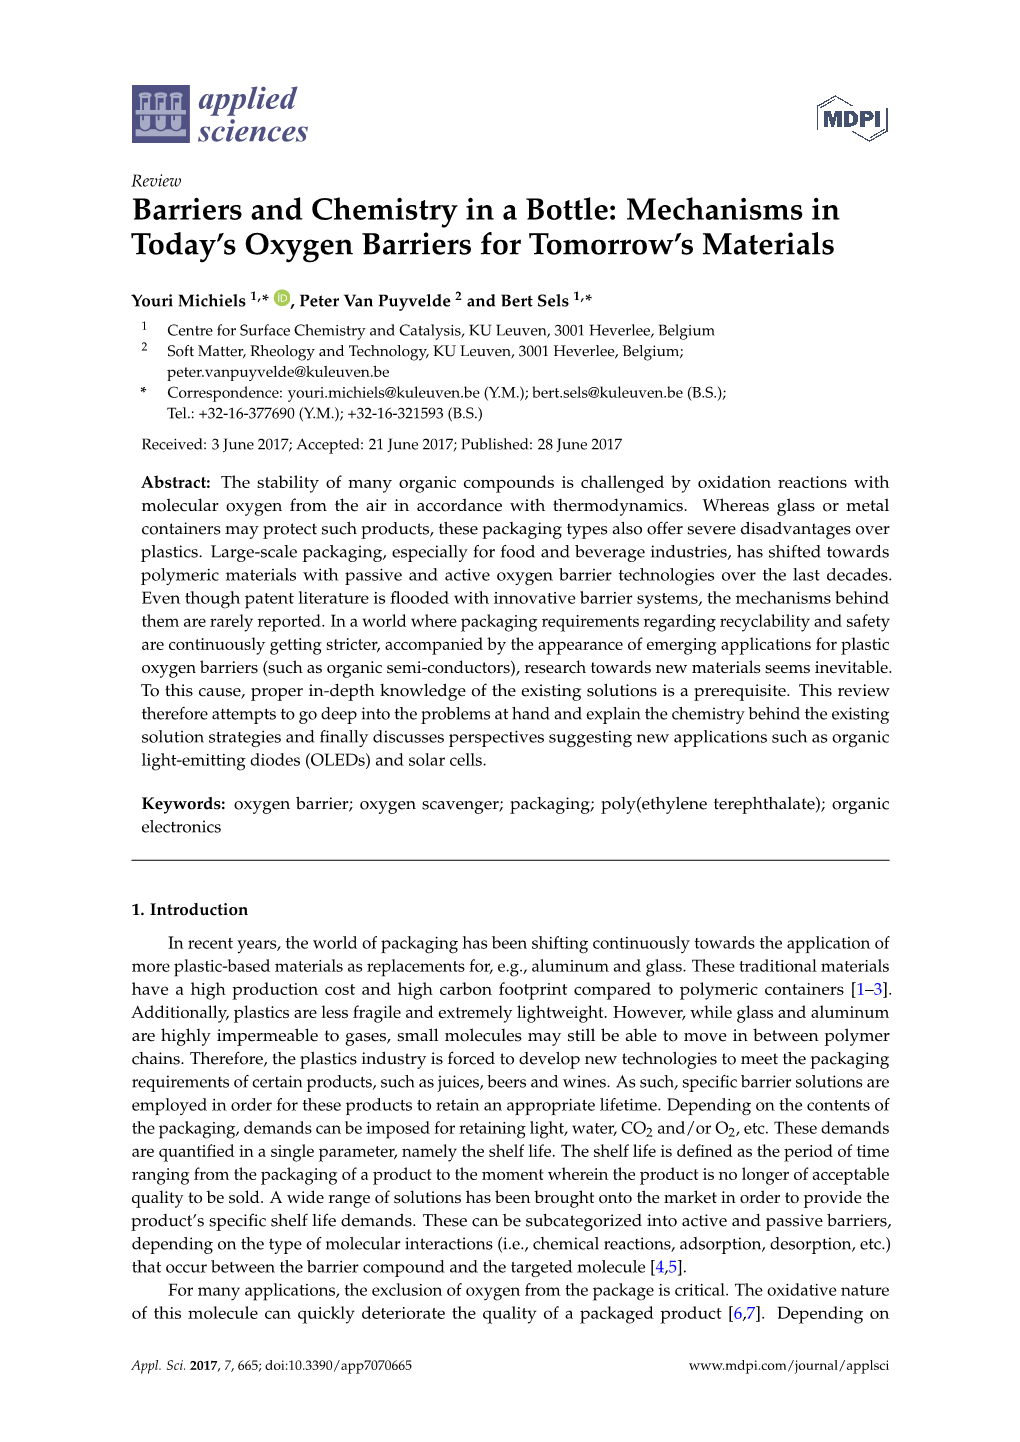 Barriers and Chemistry in a Bottle: Mechanisms in Today's Oxygen Barriers for Tomorrow's Materials